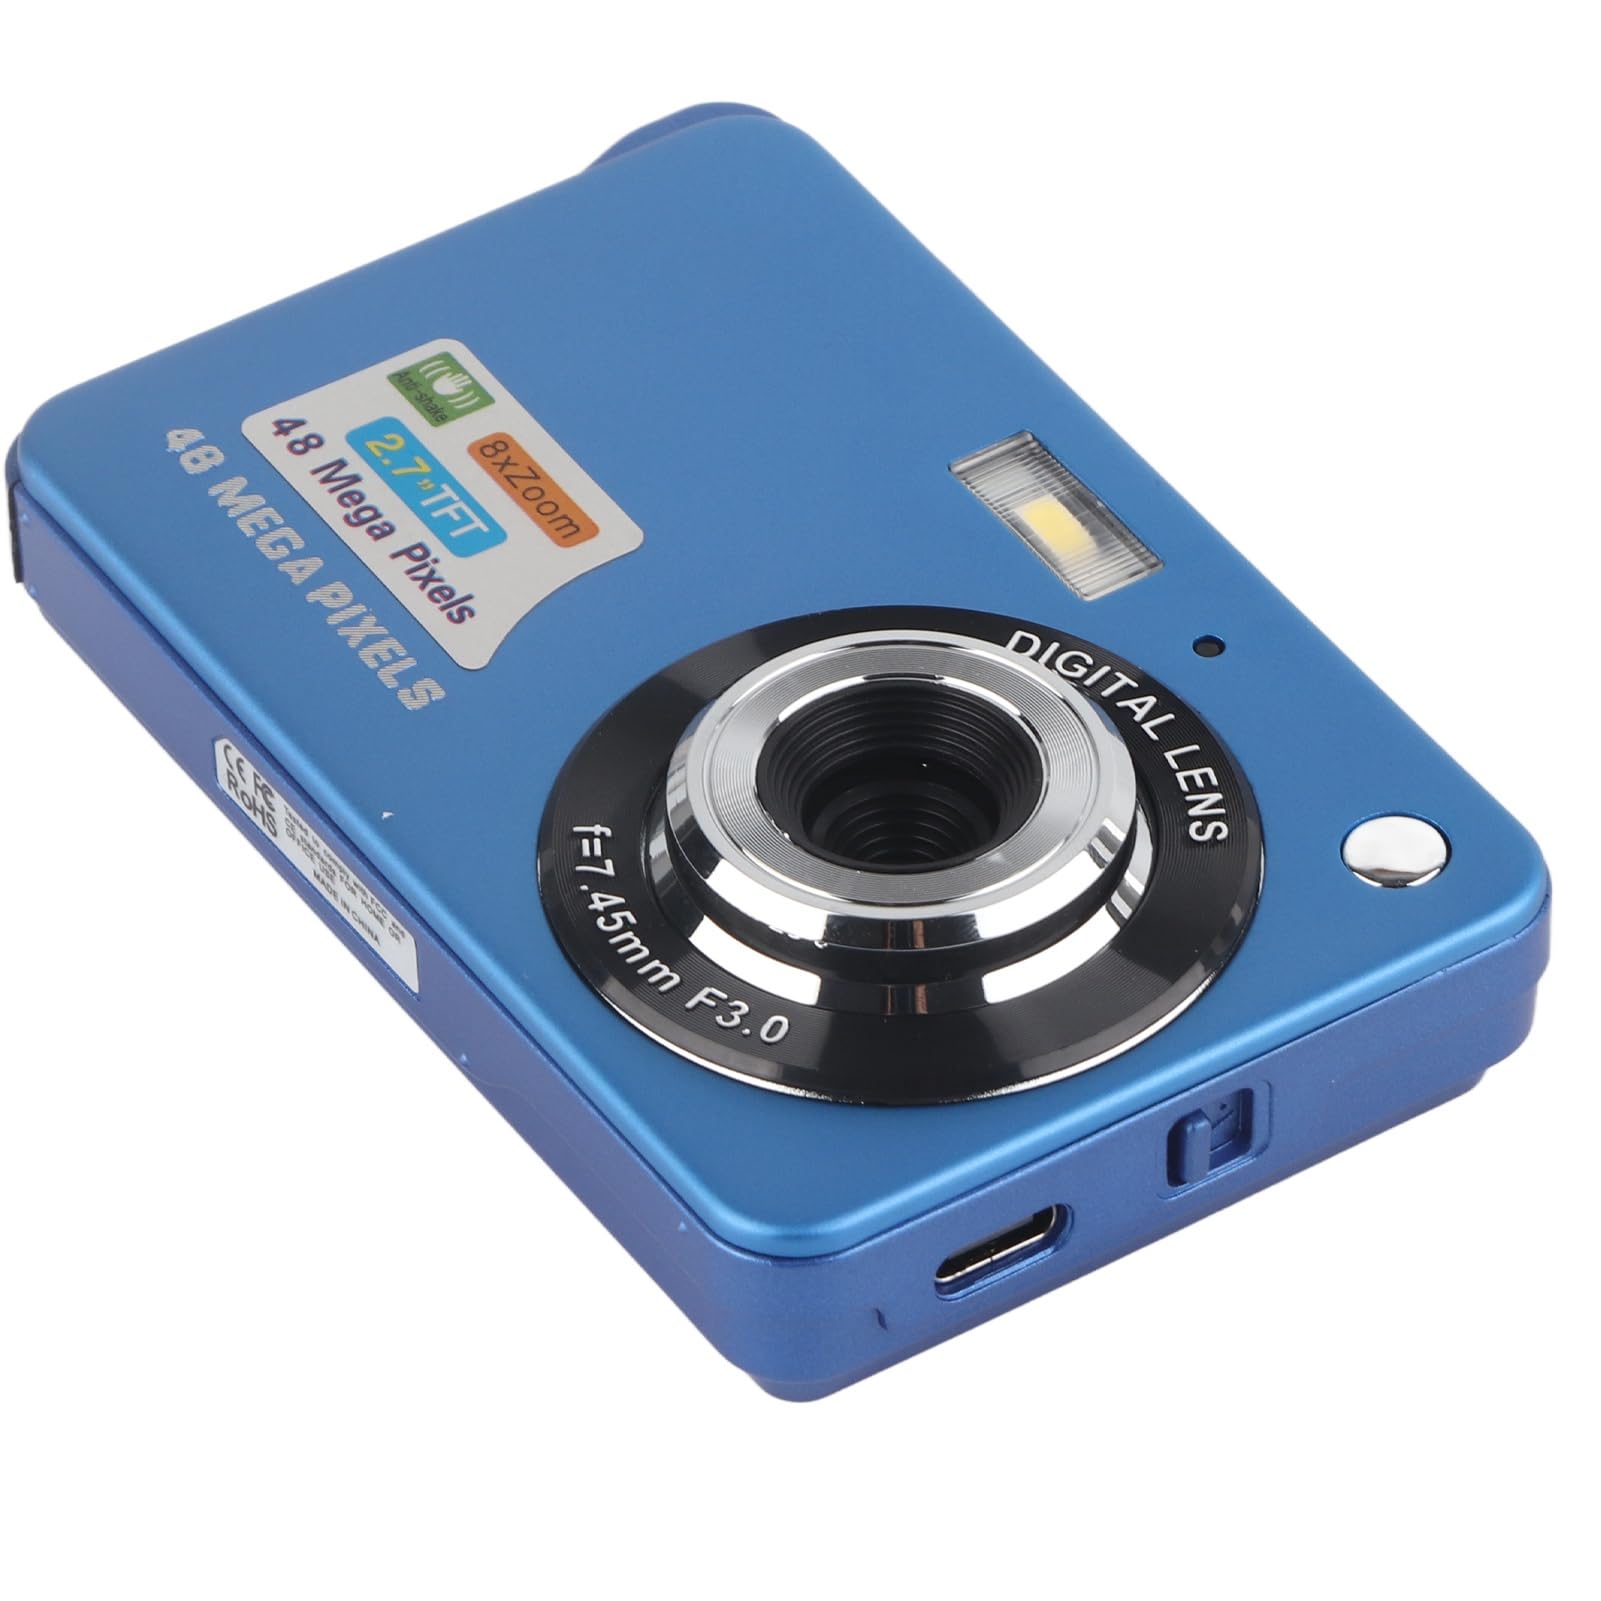 4K Digital Camera 48MP with 8X Zoom and 2.7in LCD Screen, Rechargeable Pocket Camera and 128GB Memory Card Support, USB Transfer Camera Camera for Beginners (Blue)